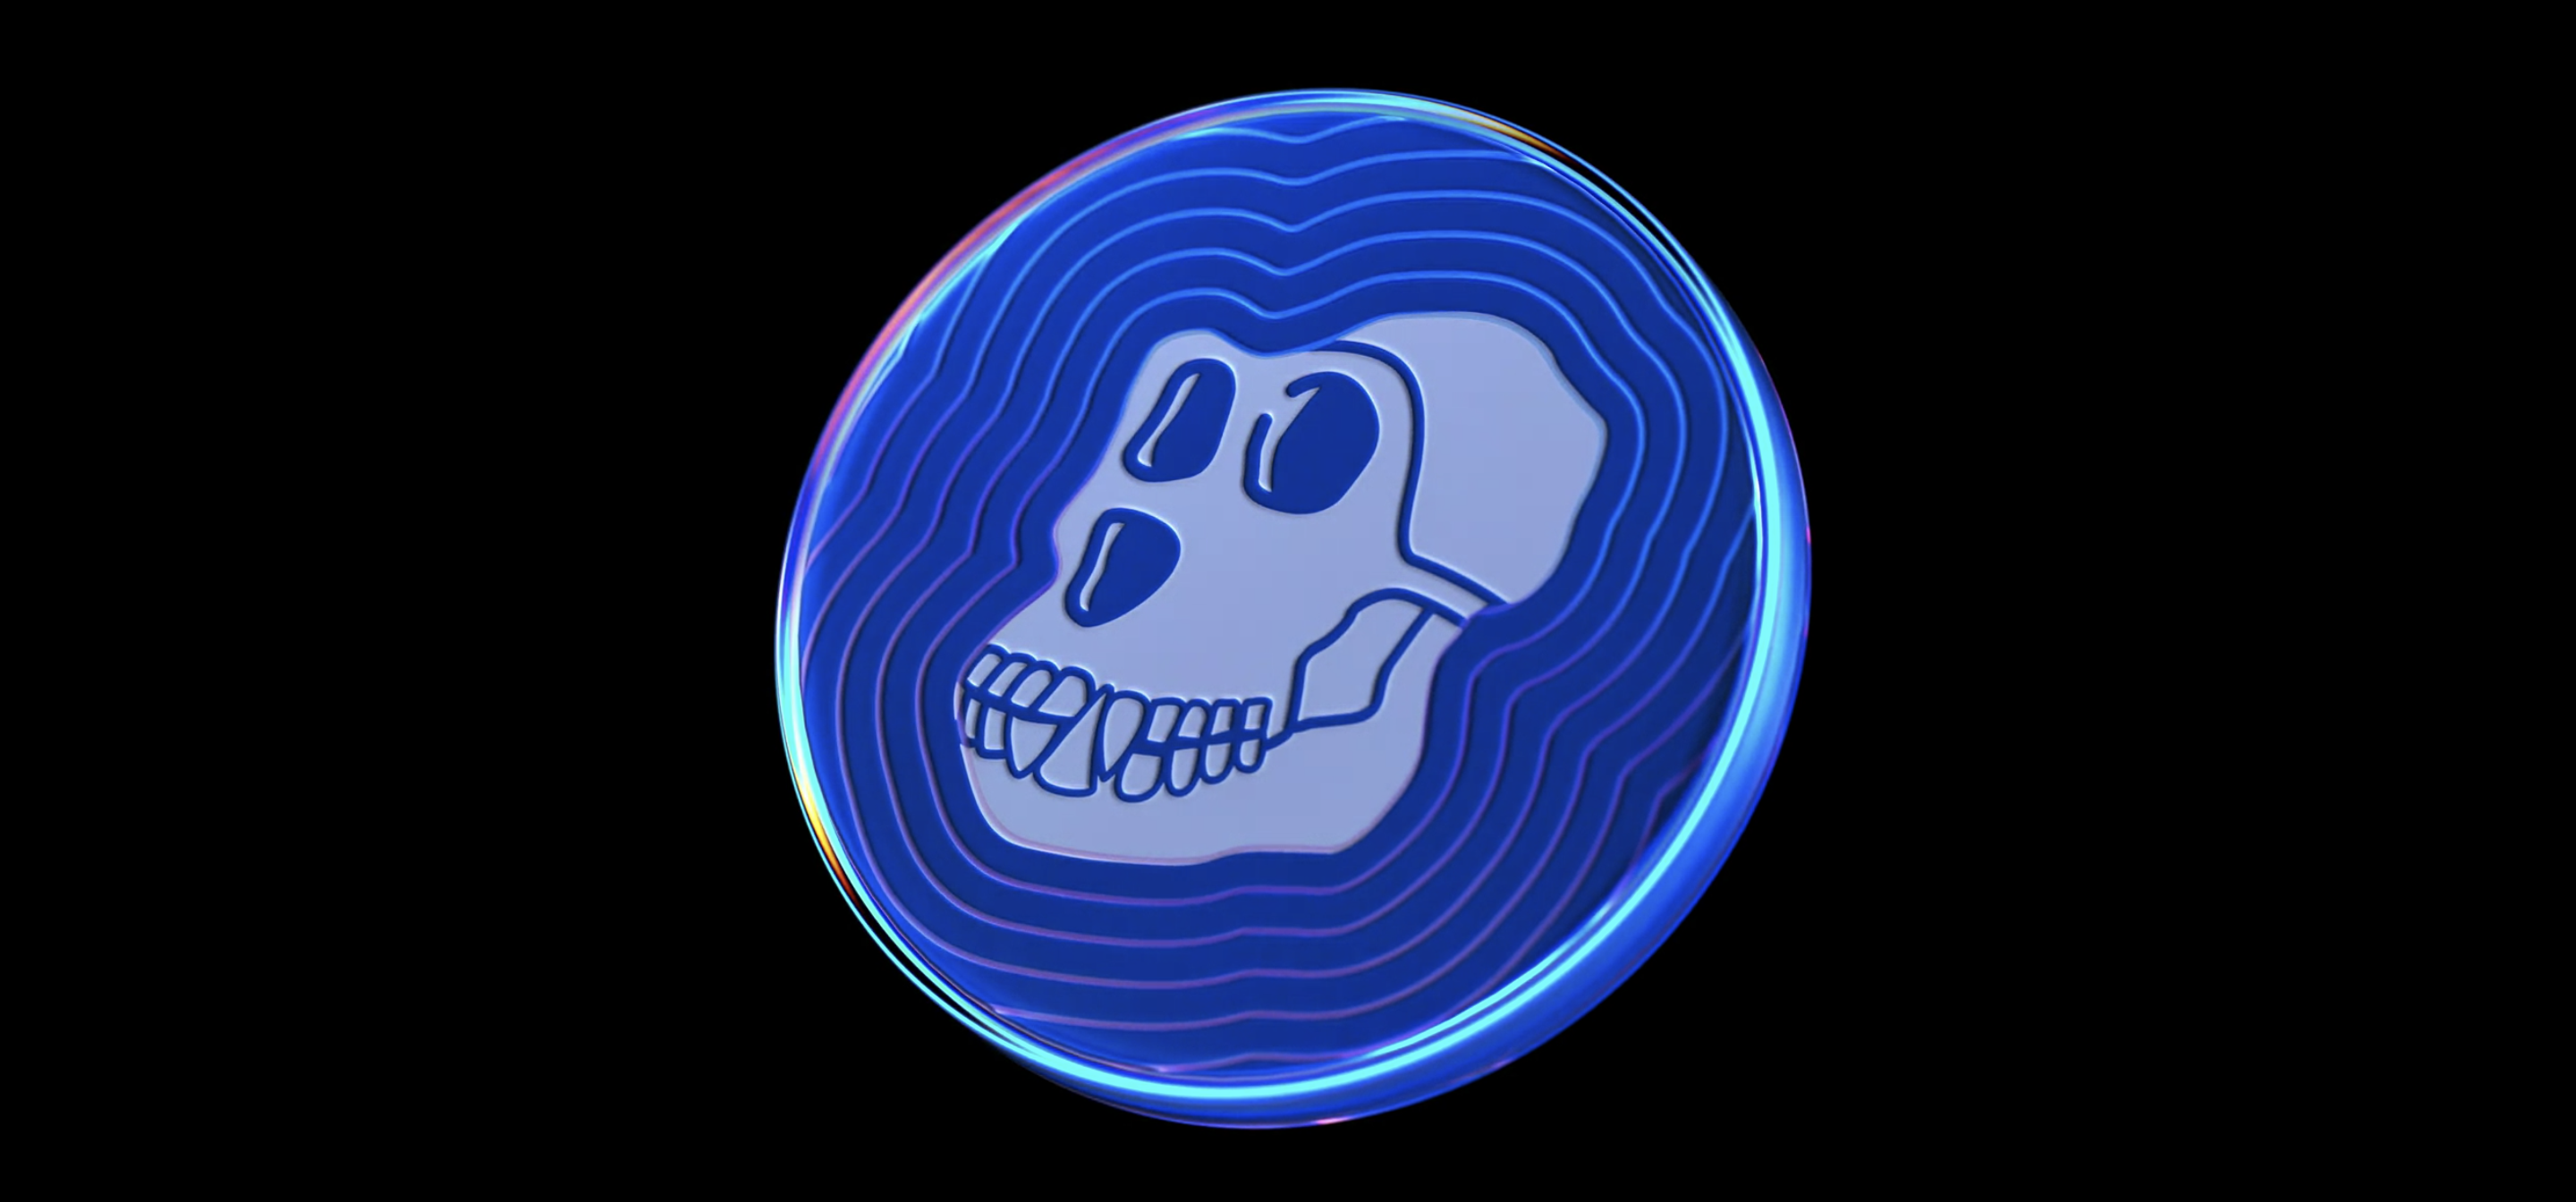 A blue coin with the Bored Ape Yacht Club logo in the middle.